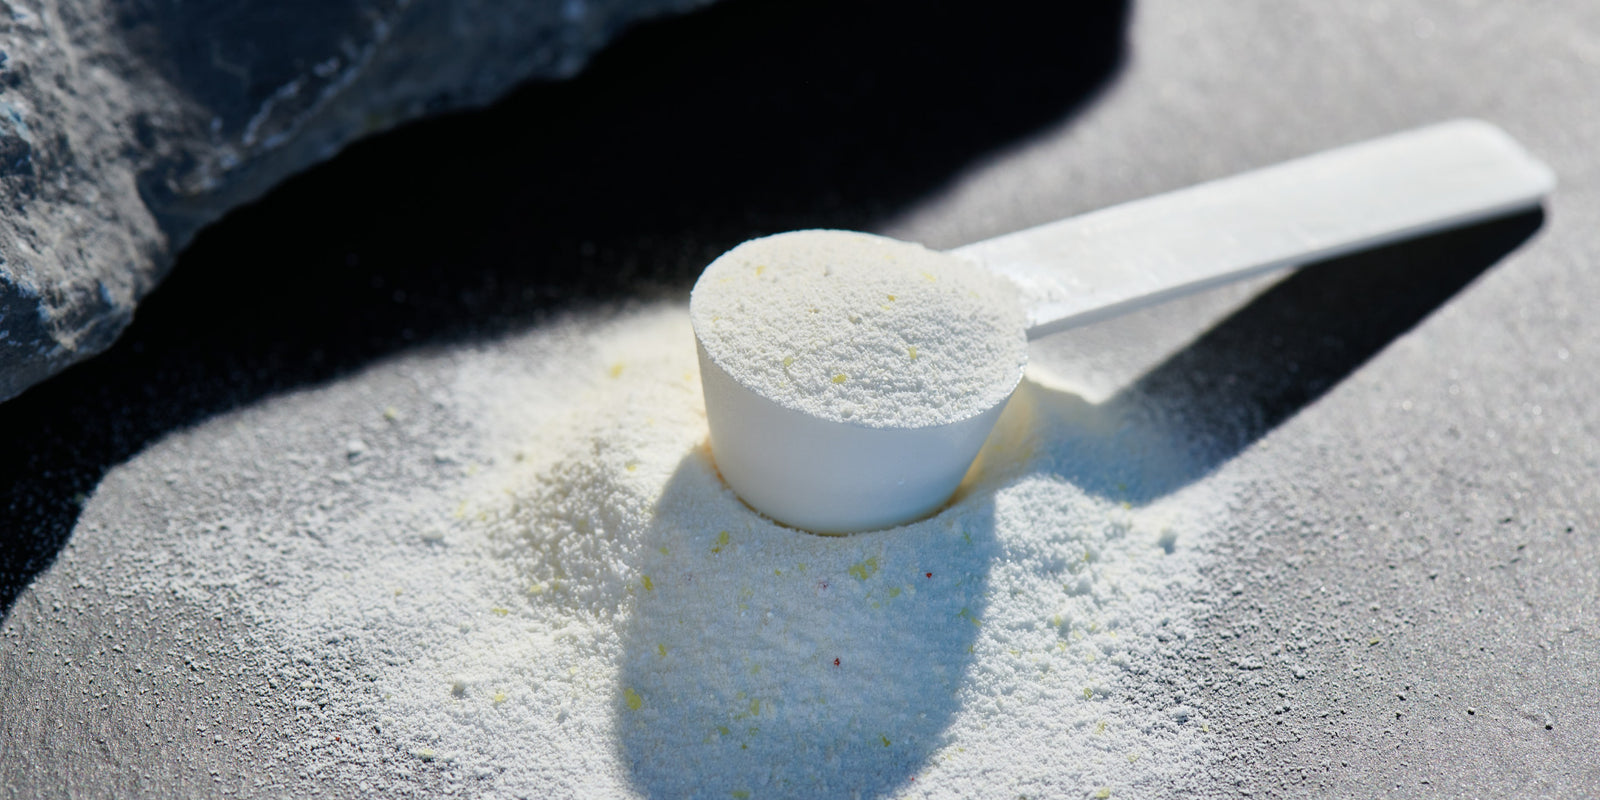 How to Use Creatine Powder for Best Results